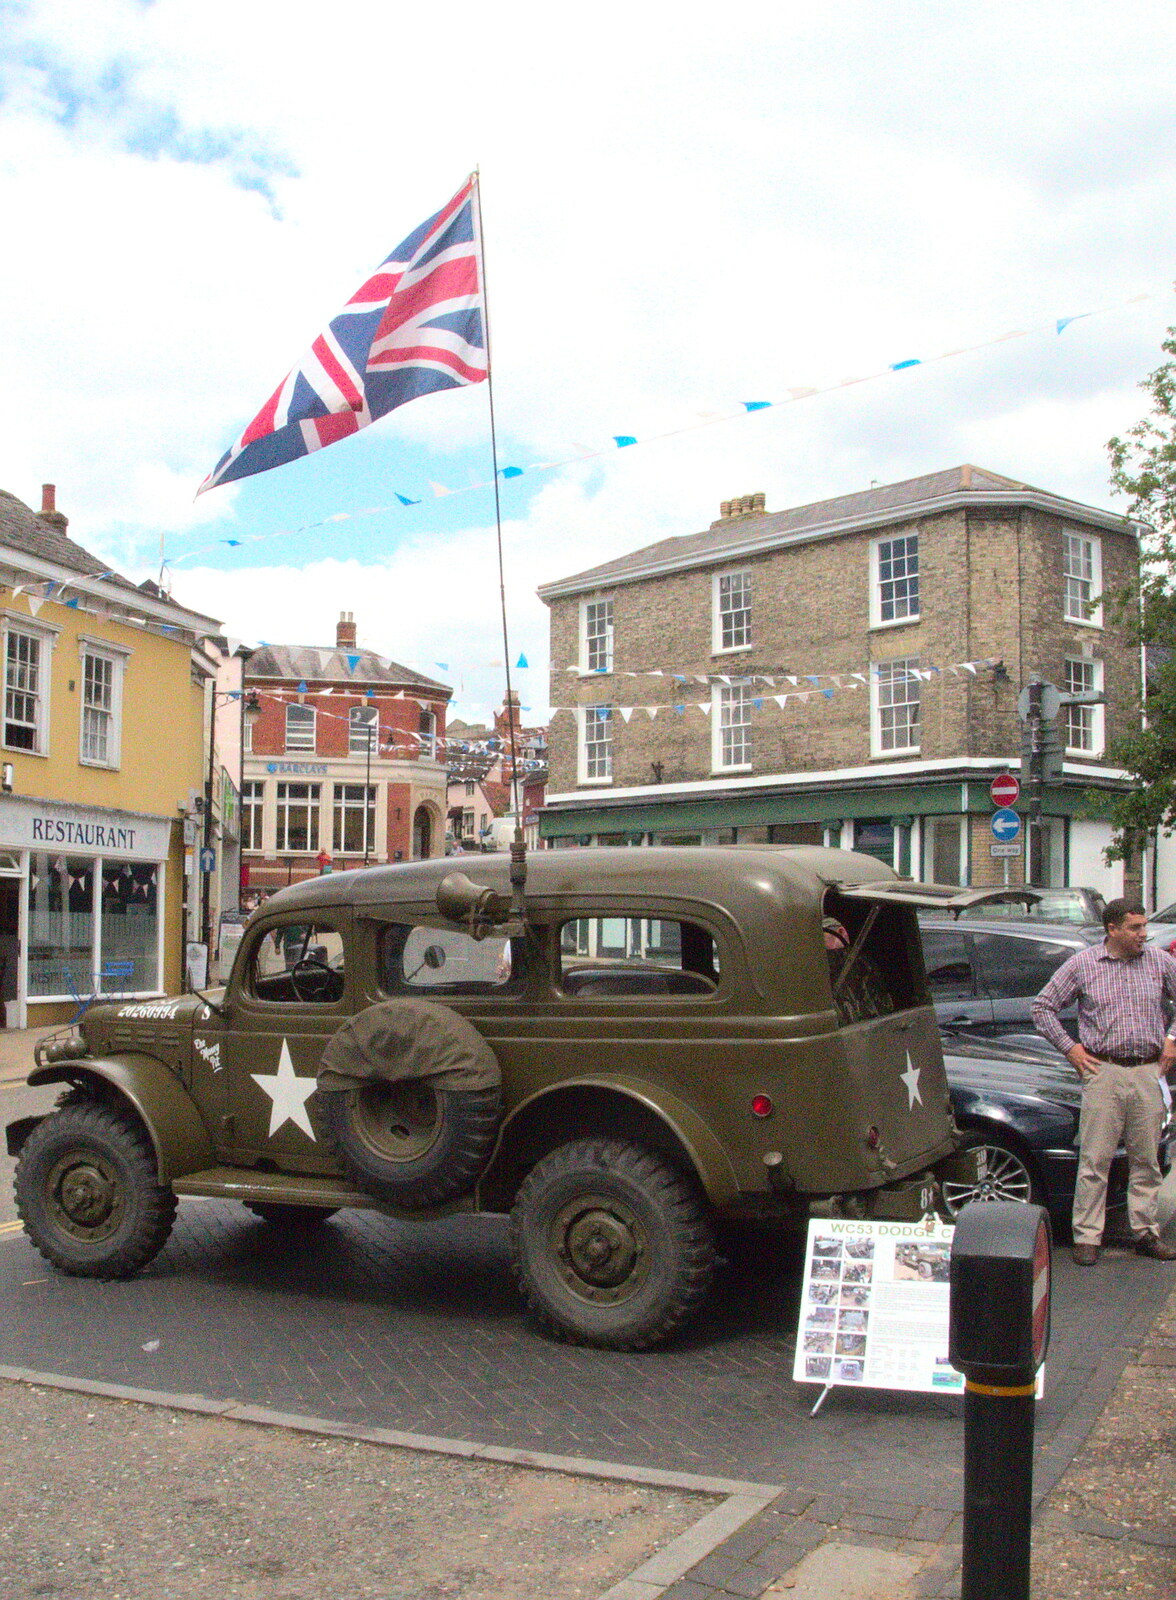 US Army vehicle from A Trip to Norwich and Diss Markets, Norfolk - 25th June 2016